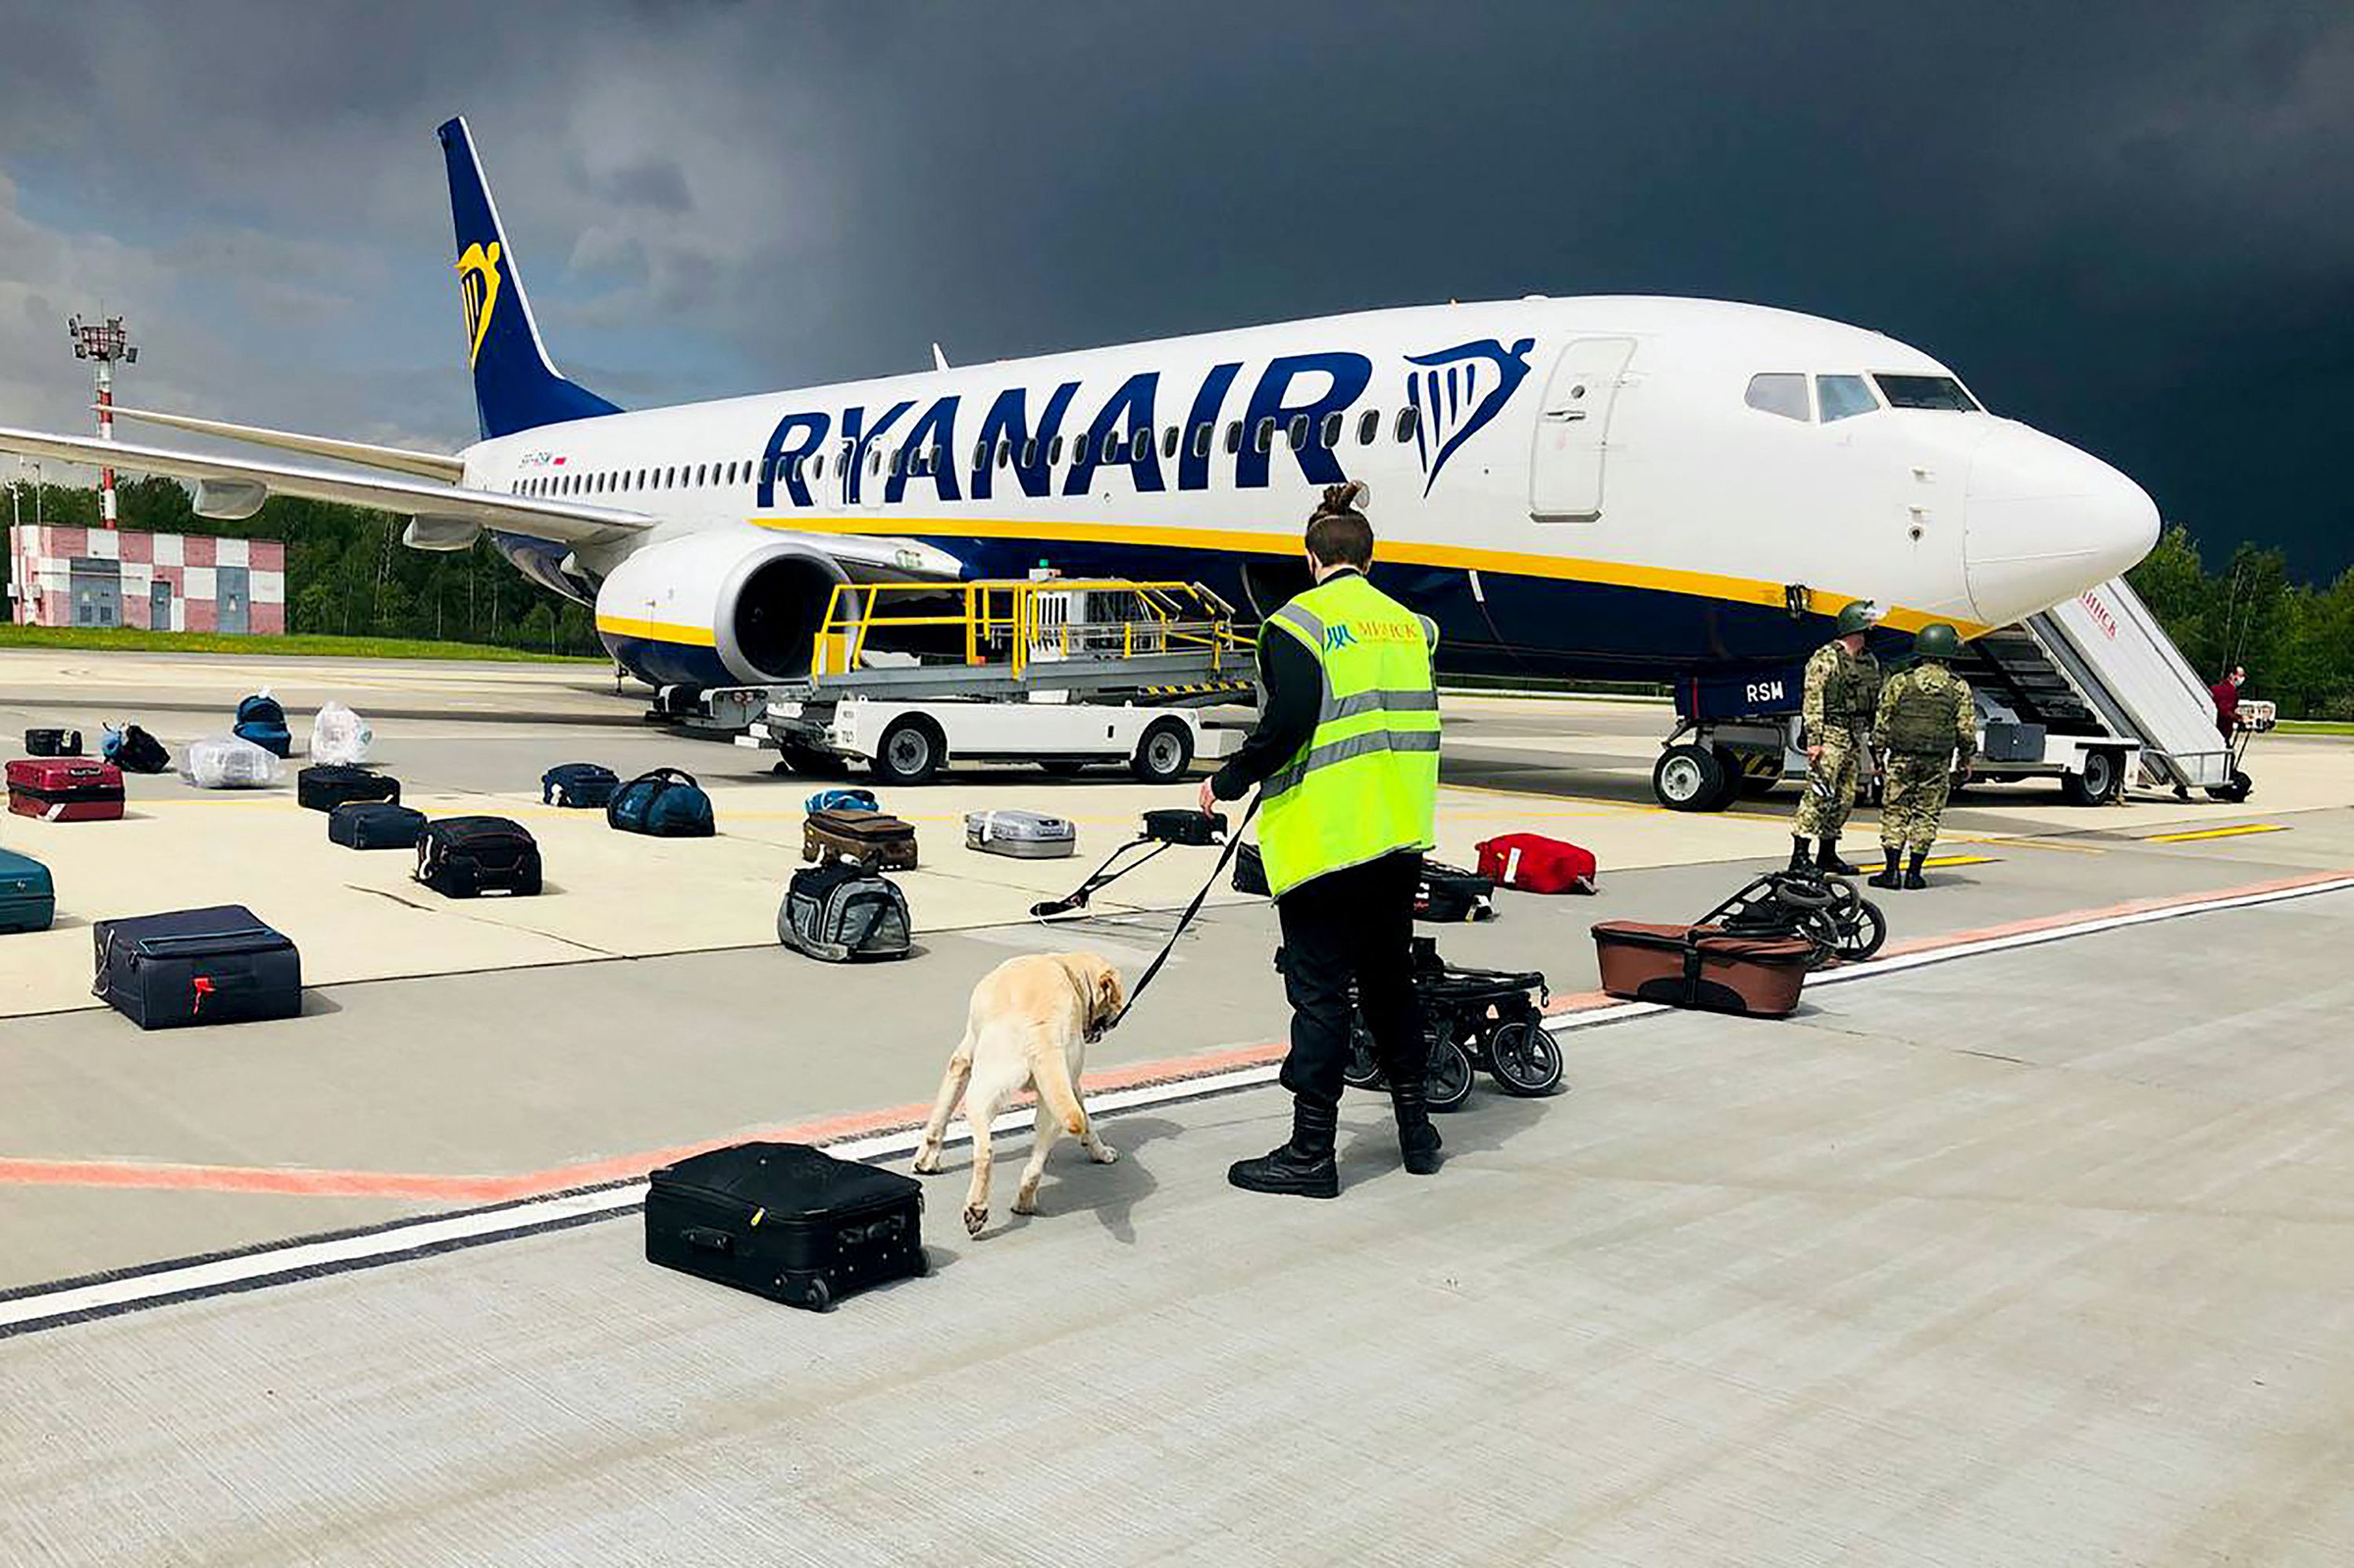 A Belarusian dog handler checks luggage after the Ryanair flight landed in Minsk on May 23. (ONLINER.BY/AFP/Getty Images)